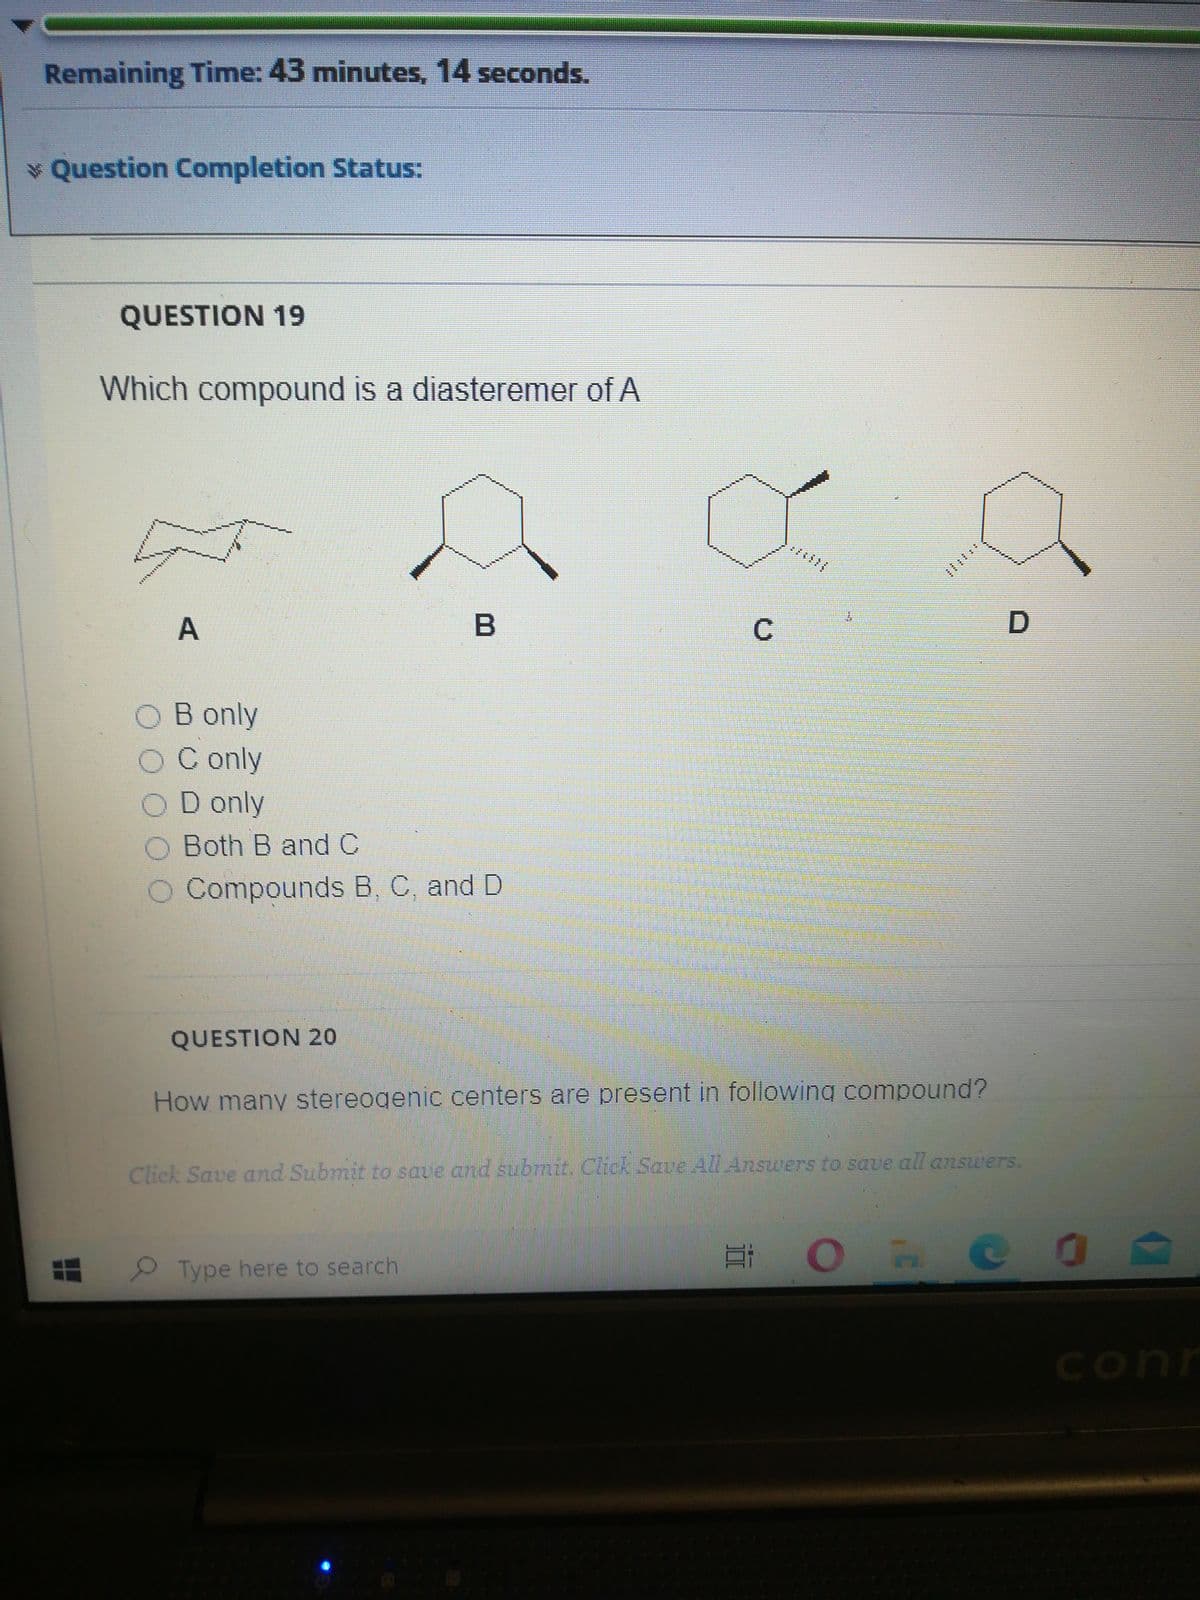 Remaining Time: 43 minutes, 14 seconds.
* Question Completion Status:
QUESTION 19
Which compound is a diasteremer of A
;主iili
A
C
B only
C only
D only
Both B and C
O Compounds B, C, and D
QUESTION 20
How many stereogenic centers are present in following compound?
Click Save and Submit to save and submit. Click Save All Answers to save all answers.
ORCO A
2 Type here to search
conn
立
